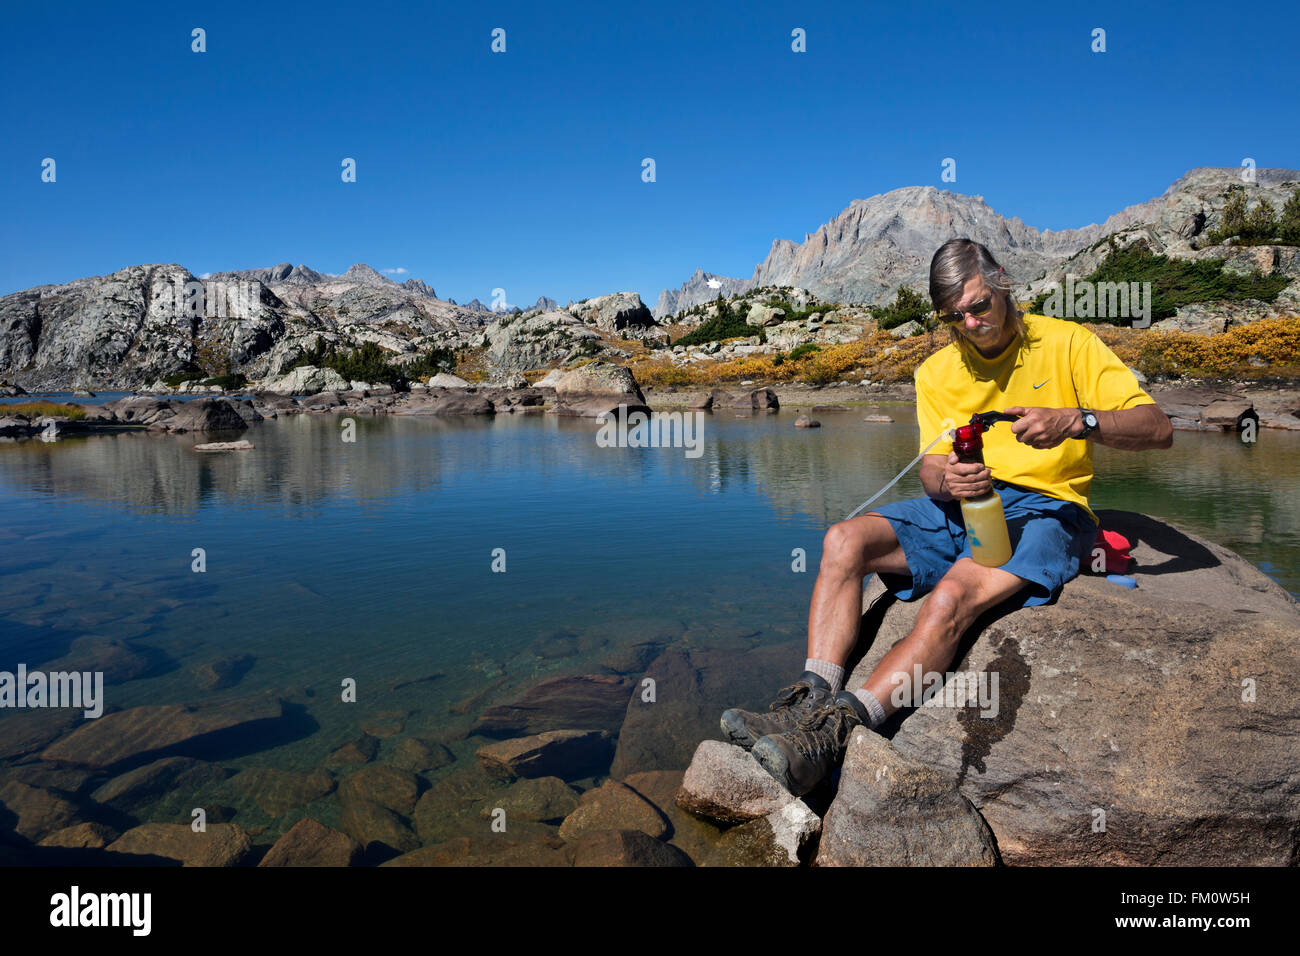 WYOMING - Using a pump filter to purify drinking water from Island Lake in the Bridger Wilderness area of the Wind River Range. Stock Photo